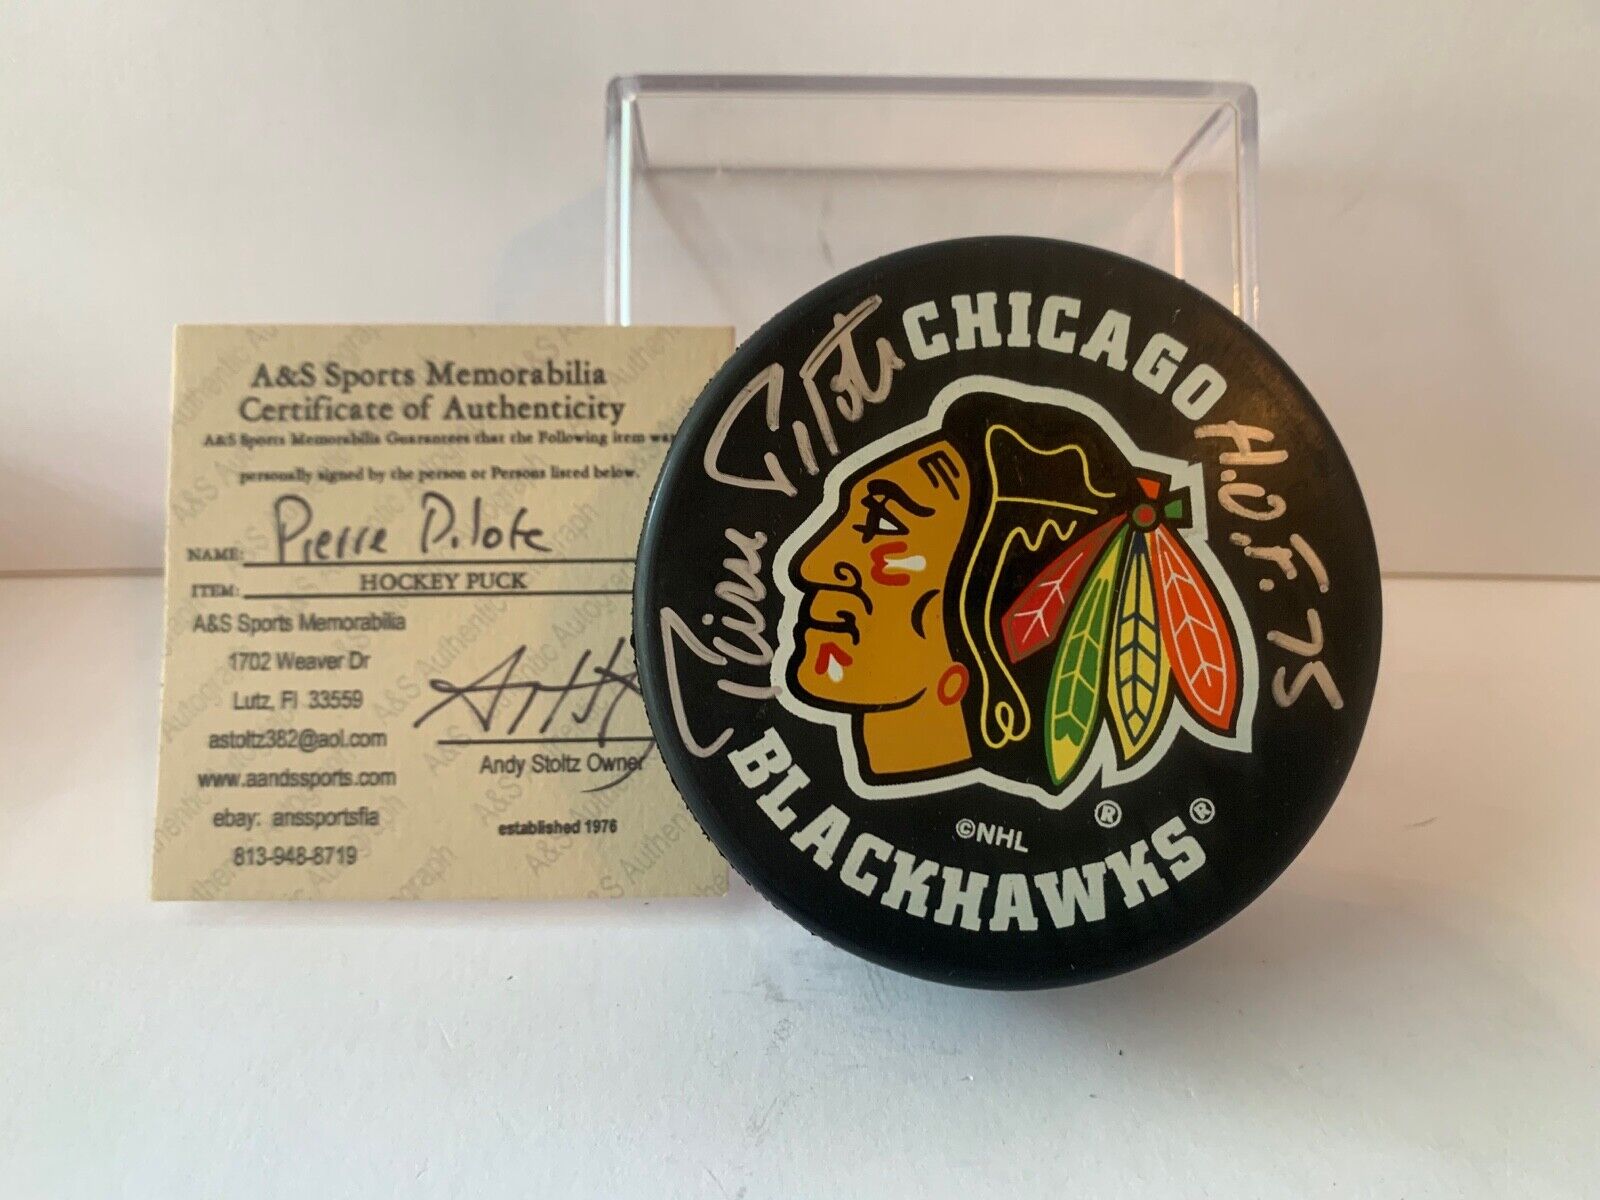 Pierre Pilote Autographed Official NHL Hockey Puck with Chicago Blackhawks Logo